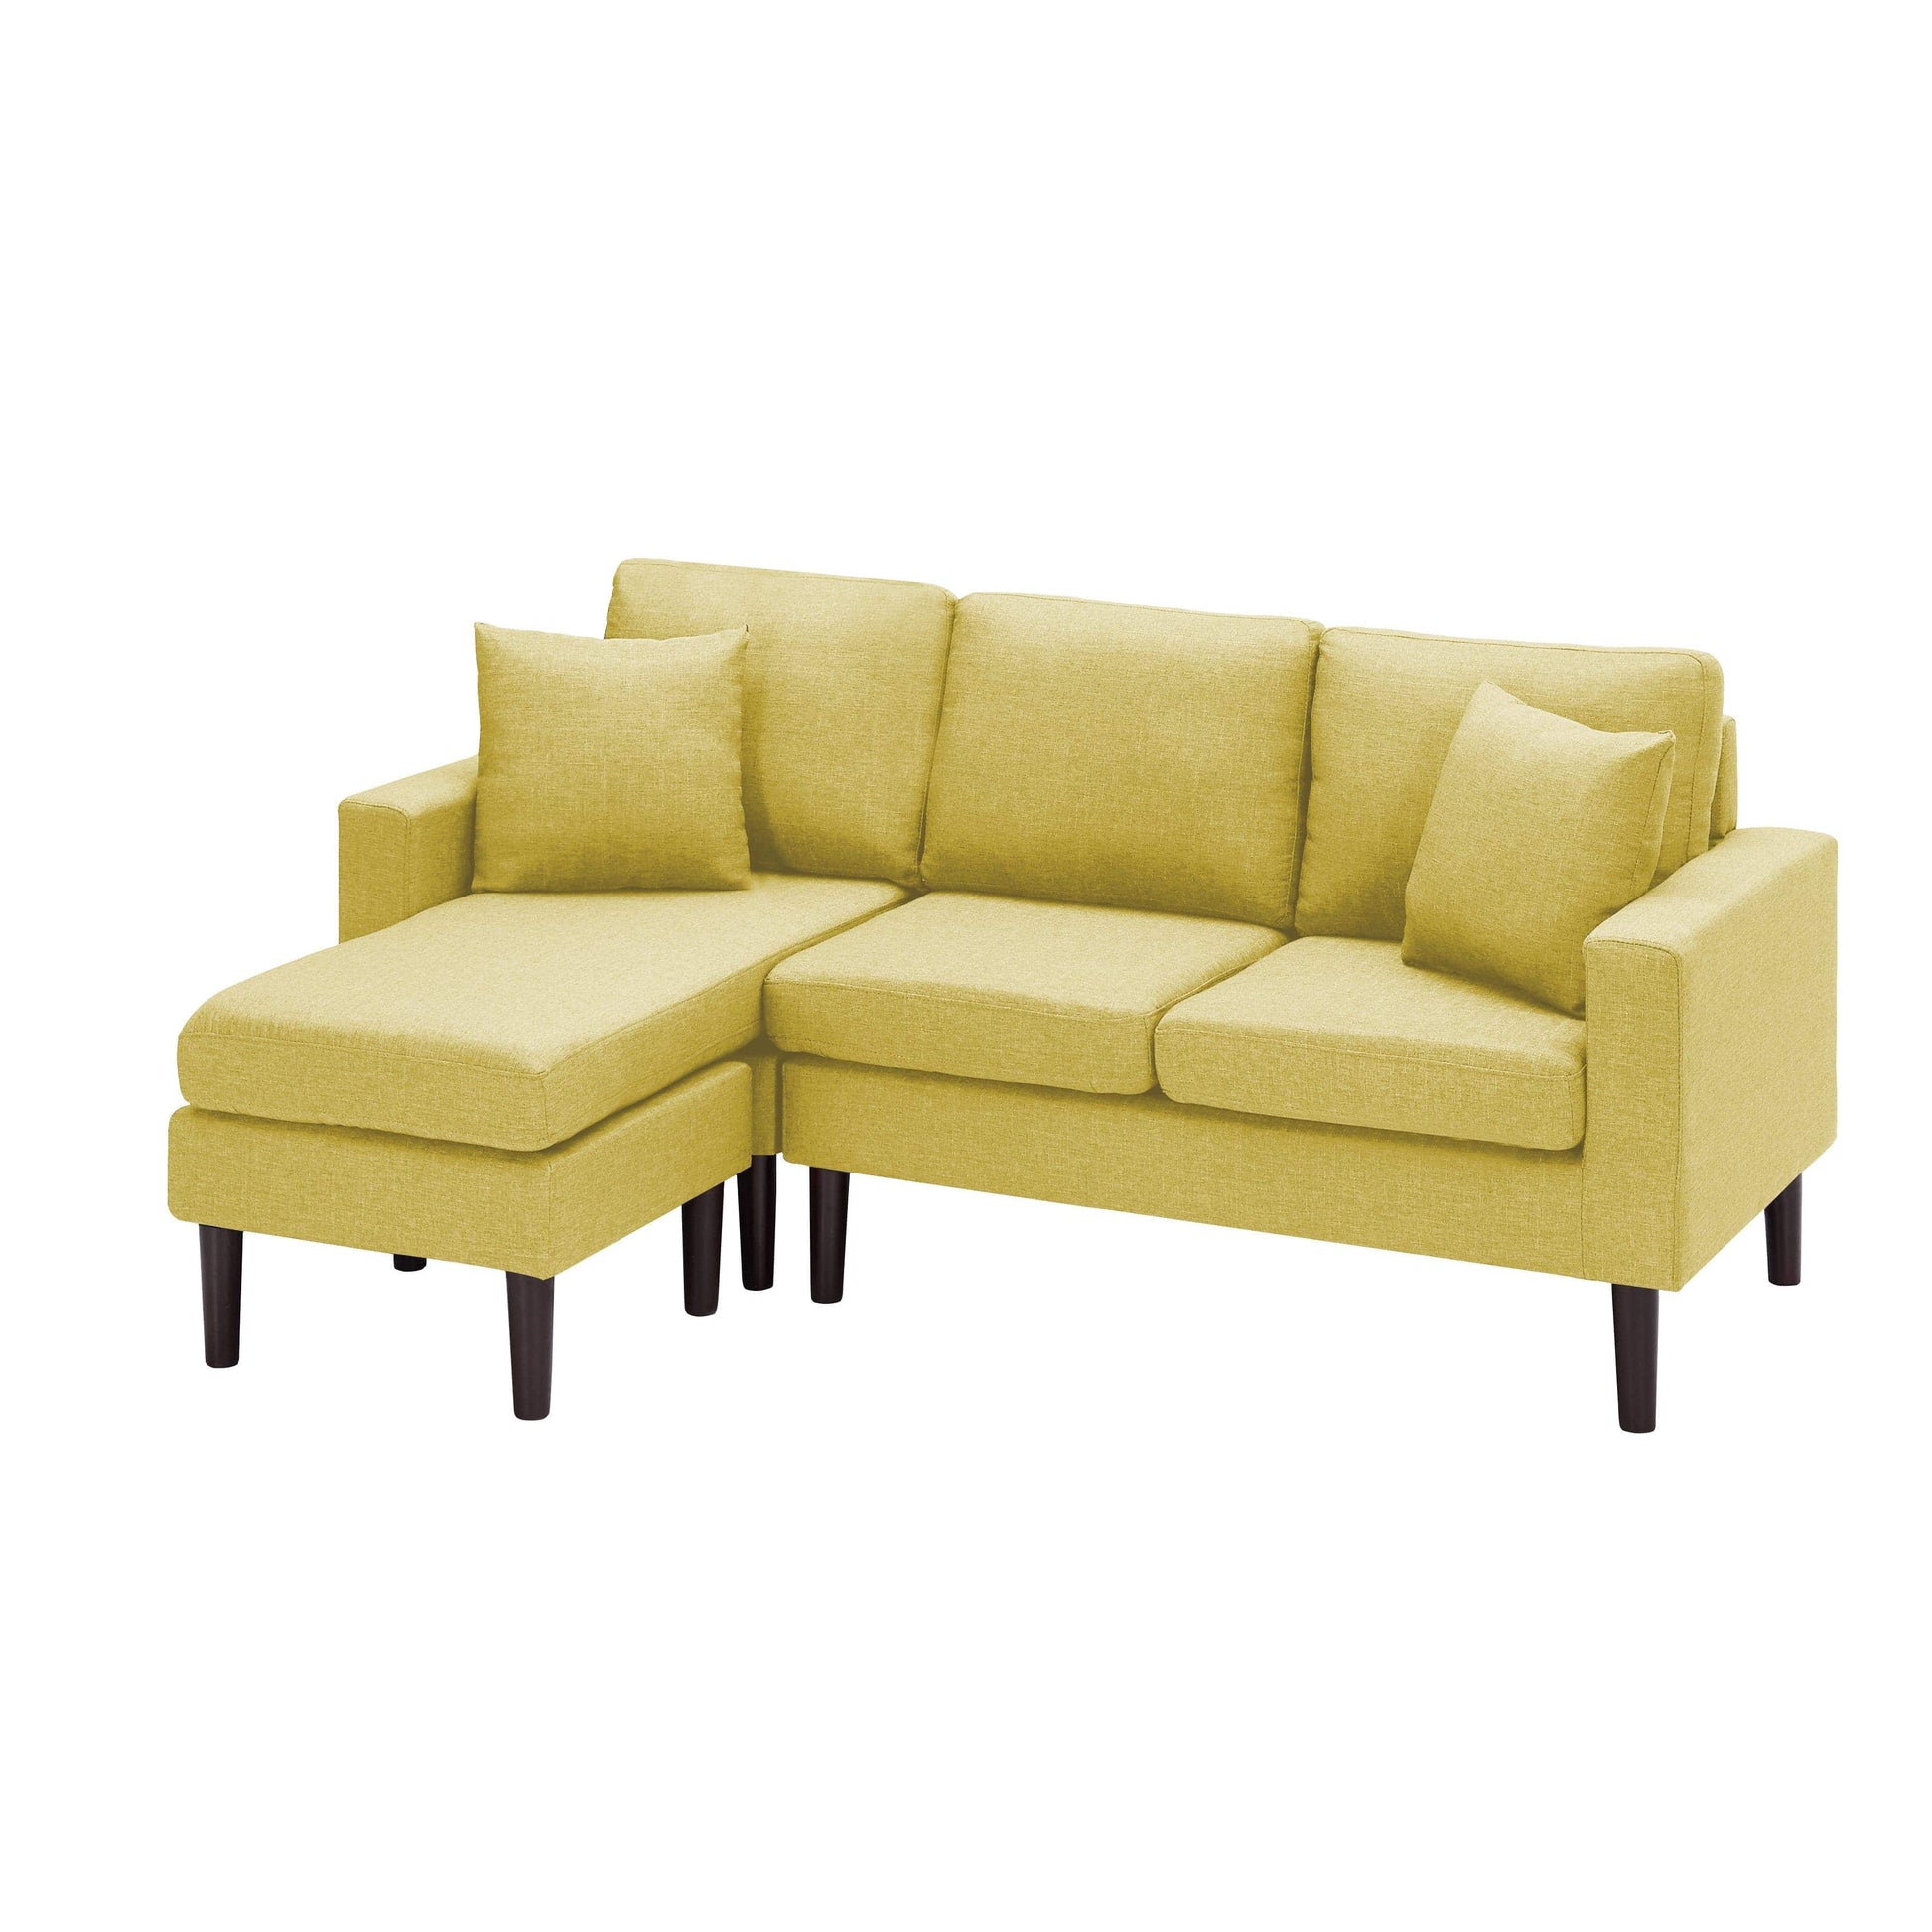 TFC&H Co. 72" SECTIONAL SOFA LEFT HAND FACING w/ 2 PILLOWS- Ships from The US - sectional at TFC&H Co.